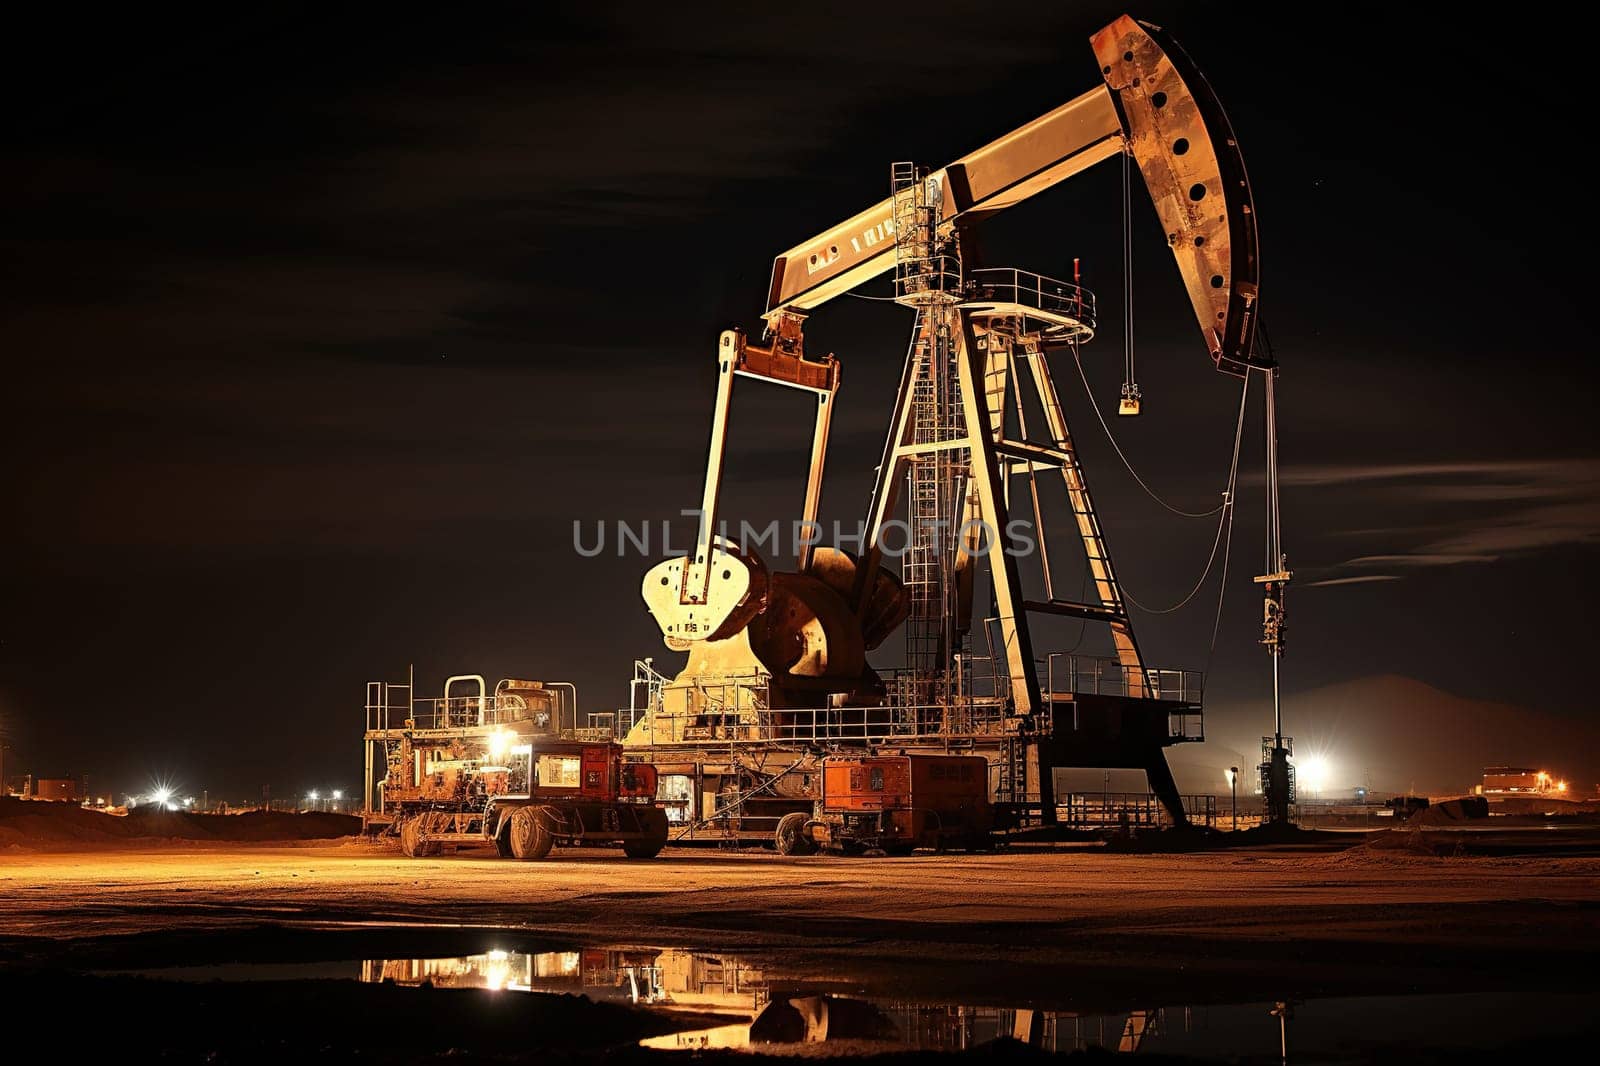 Drilling rig in an oil field to extract fossil fuels and extract crude oil from the ground. Oil drilling rig.